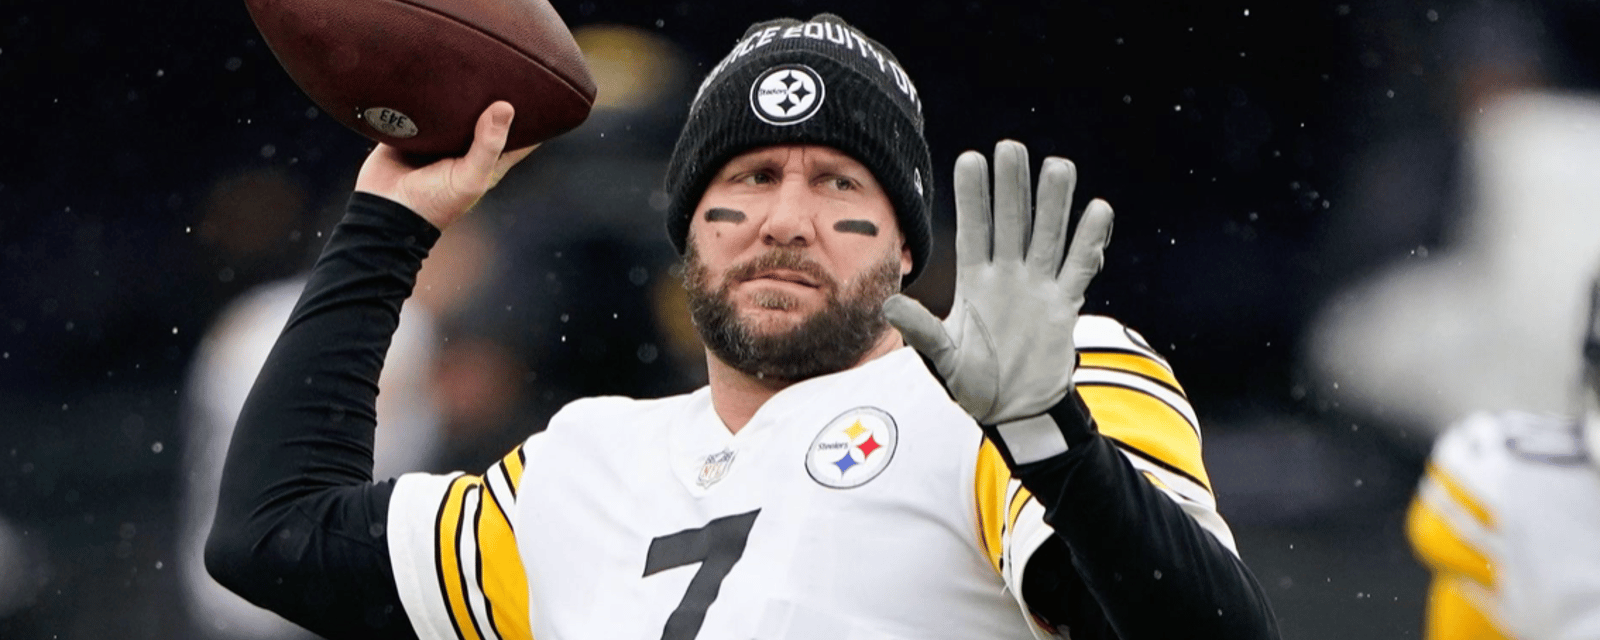 Ben Roethlisberger rips the Steelers for missed draft pick 